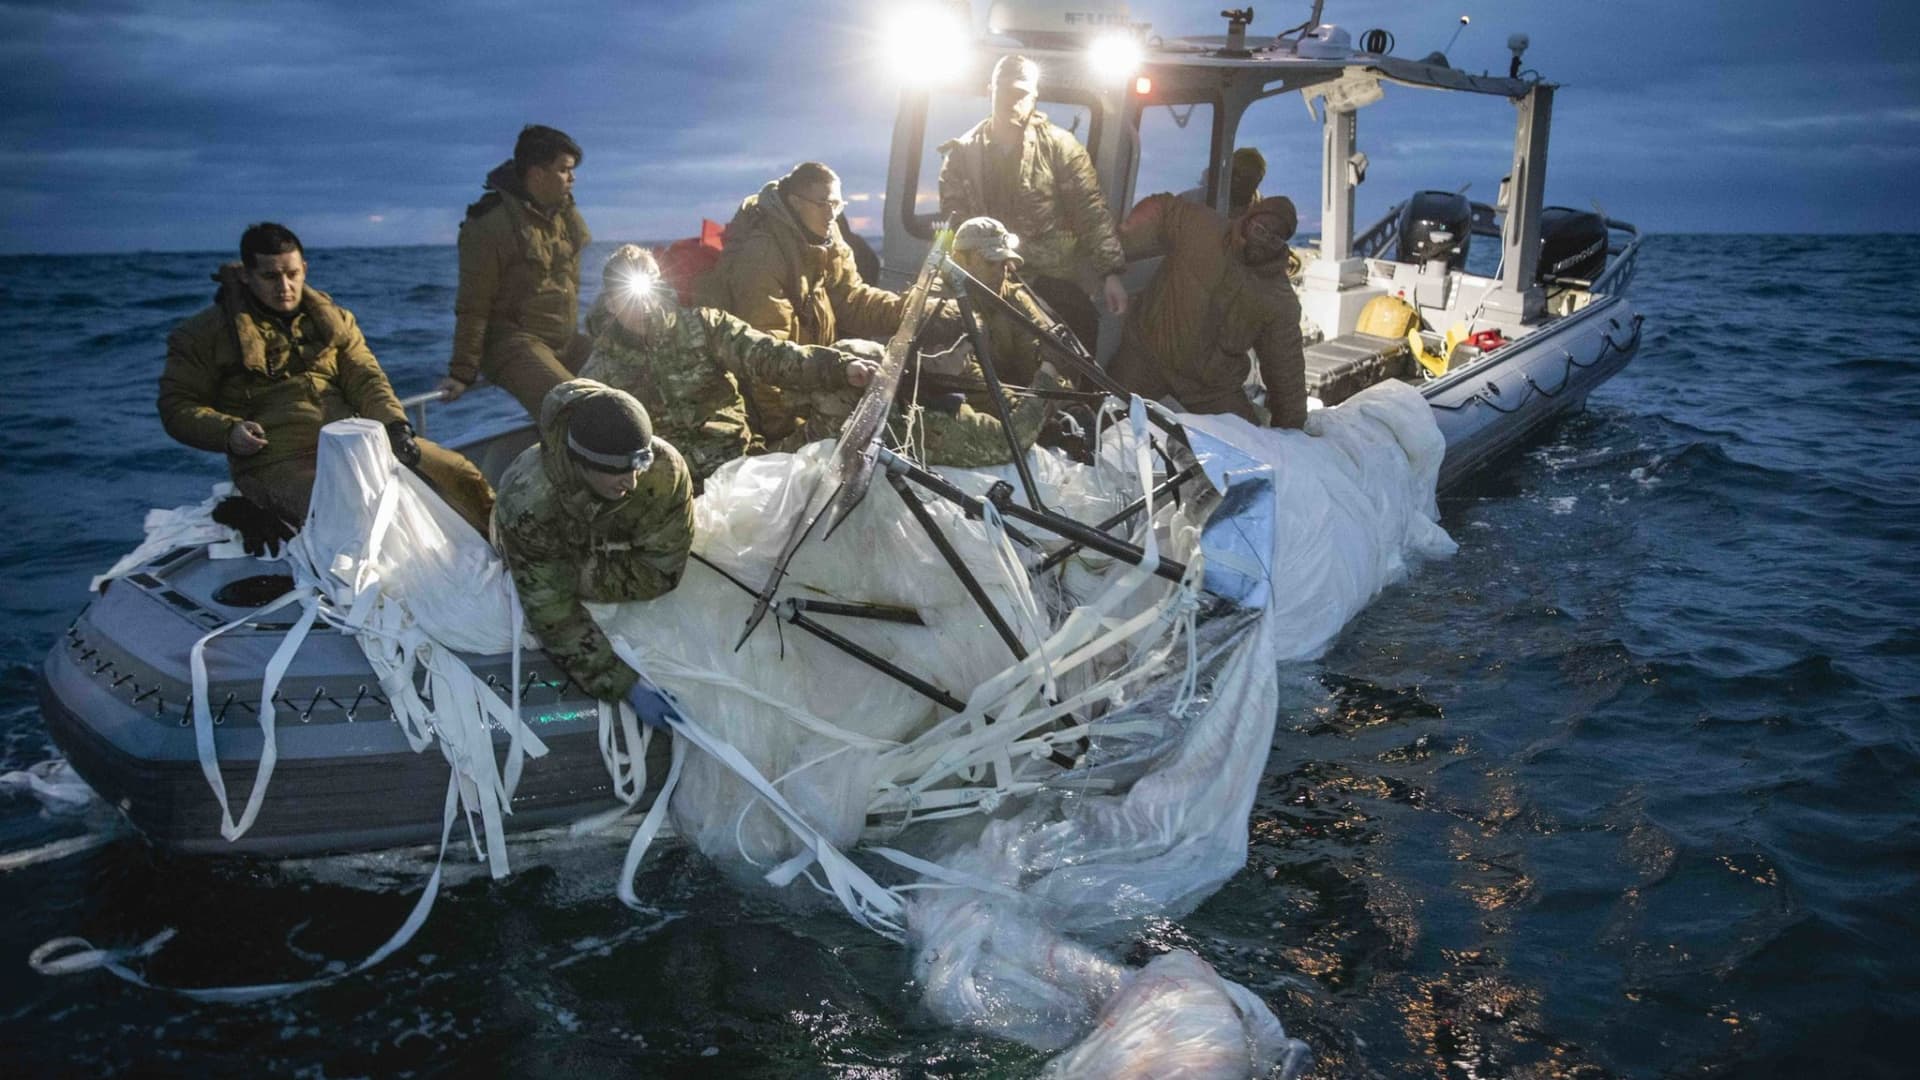 New photos show the U.S. Navy recovering downed aircraft off U.S. coast